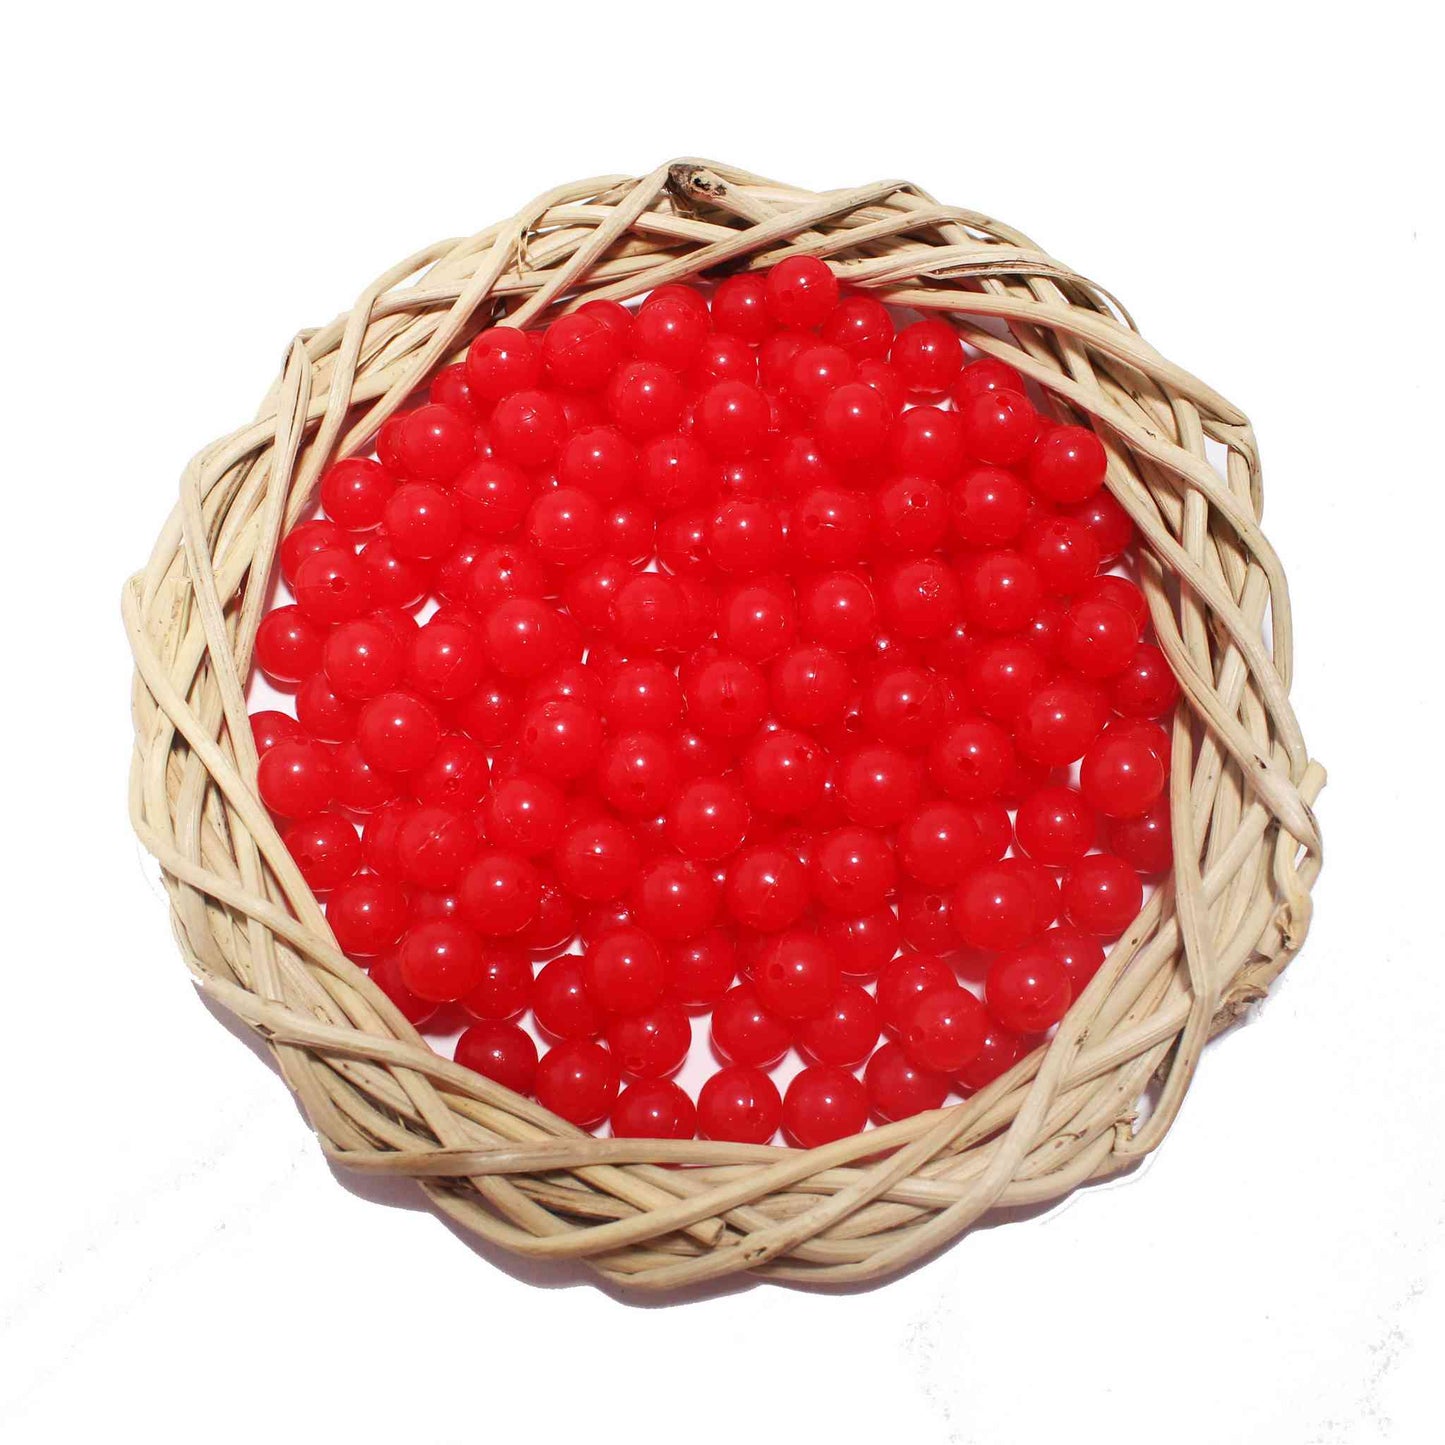 Premium quality Round Glass Beads for DIY Craft, Trousseau Packing or Decoration - Design 734, Red - Indian Petals